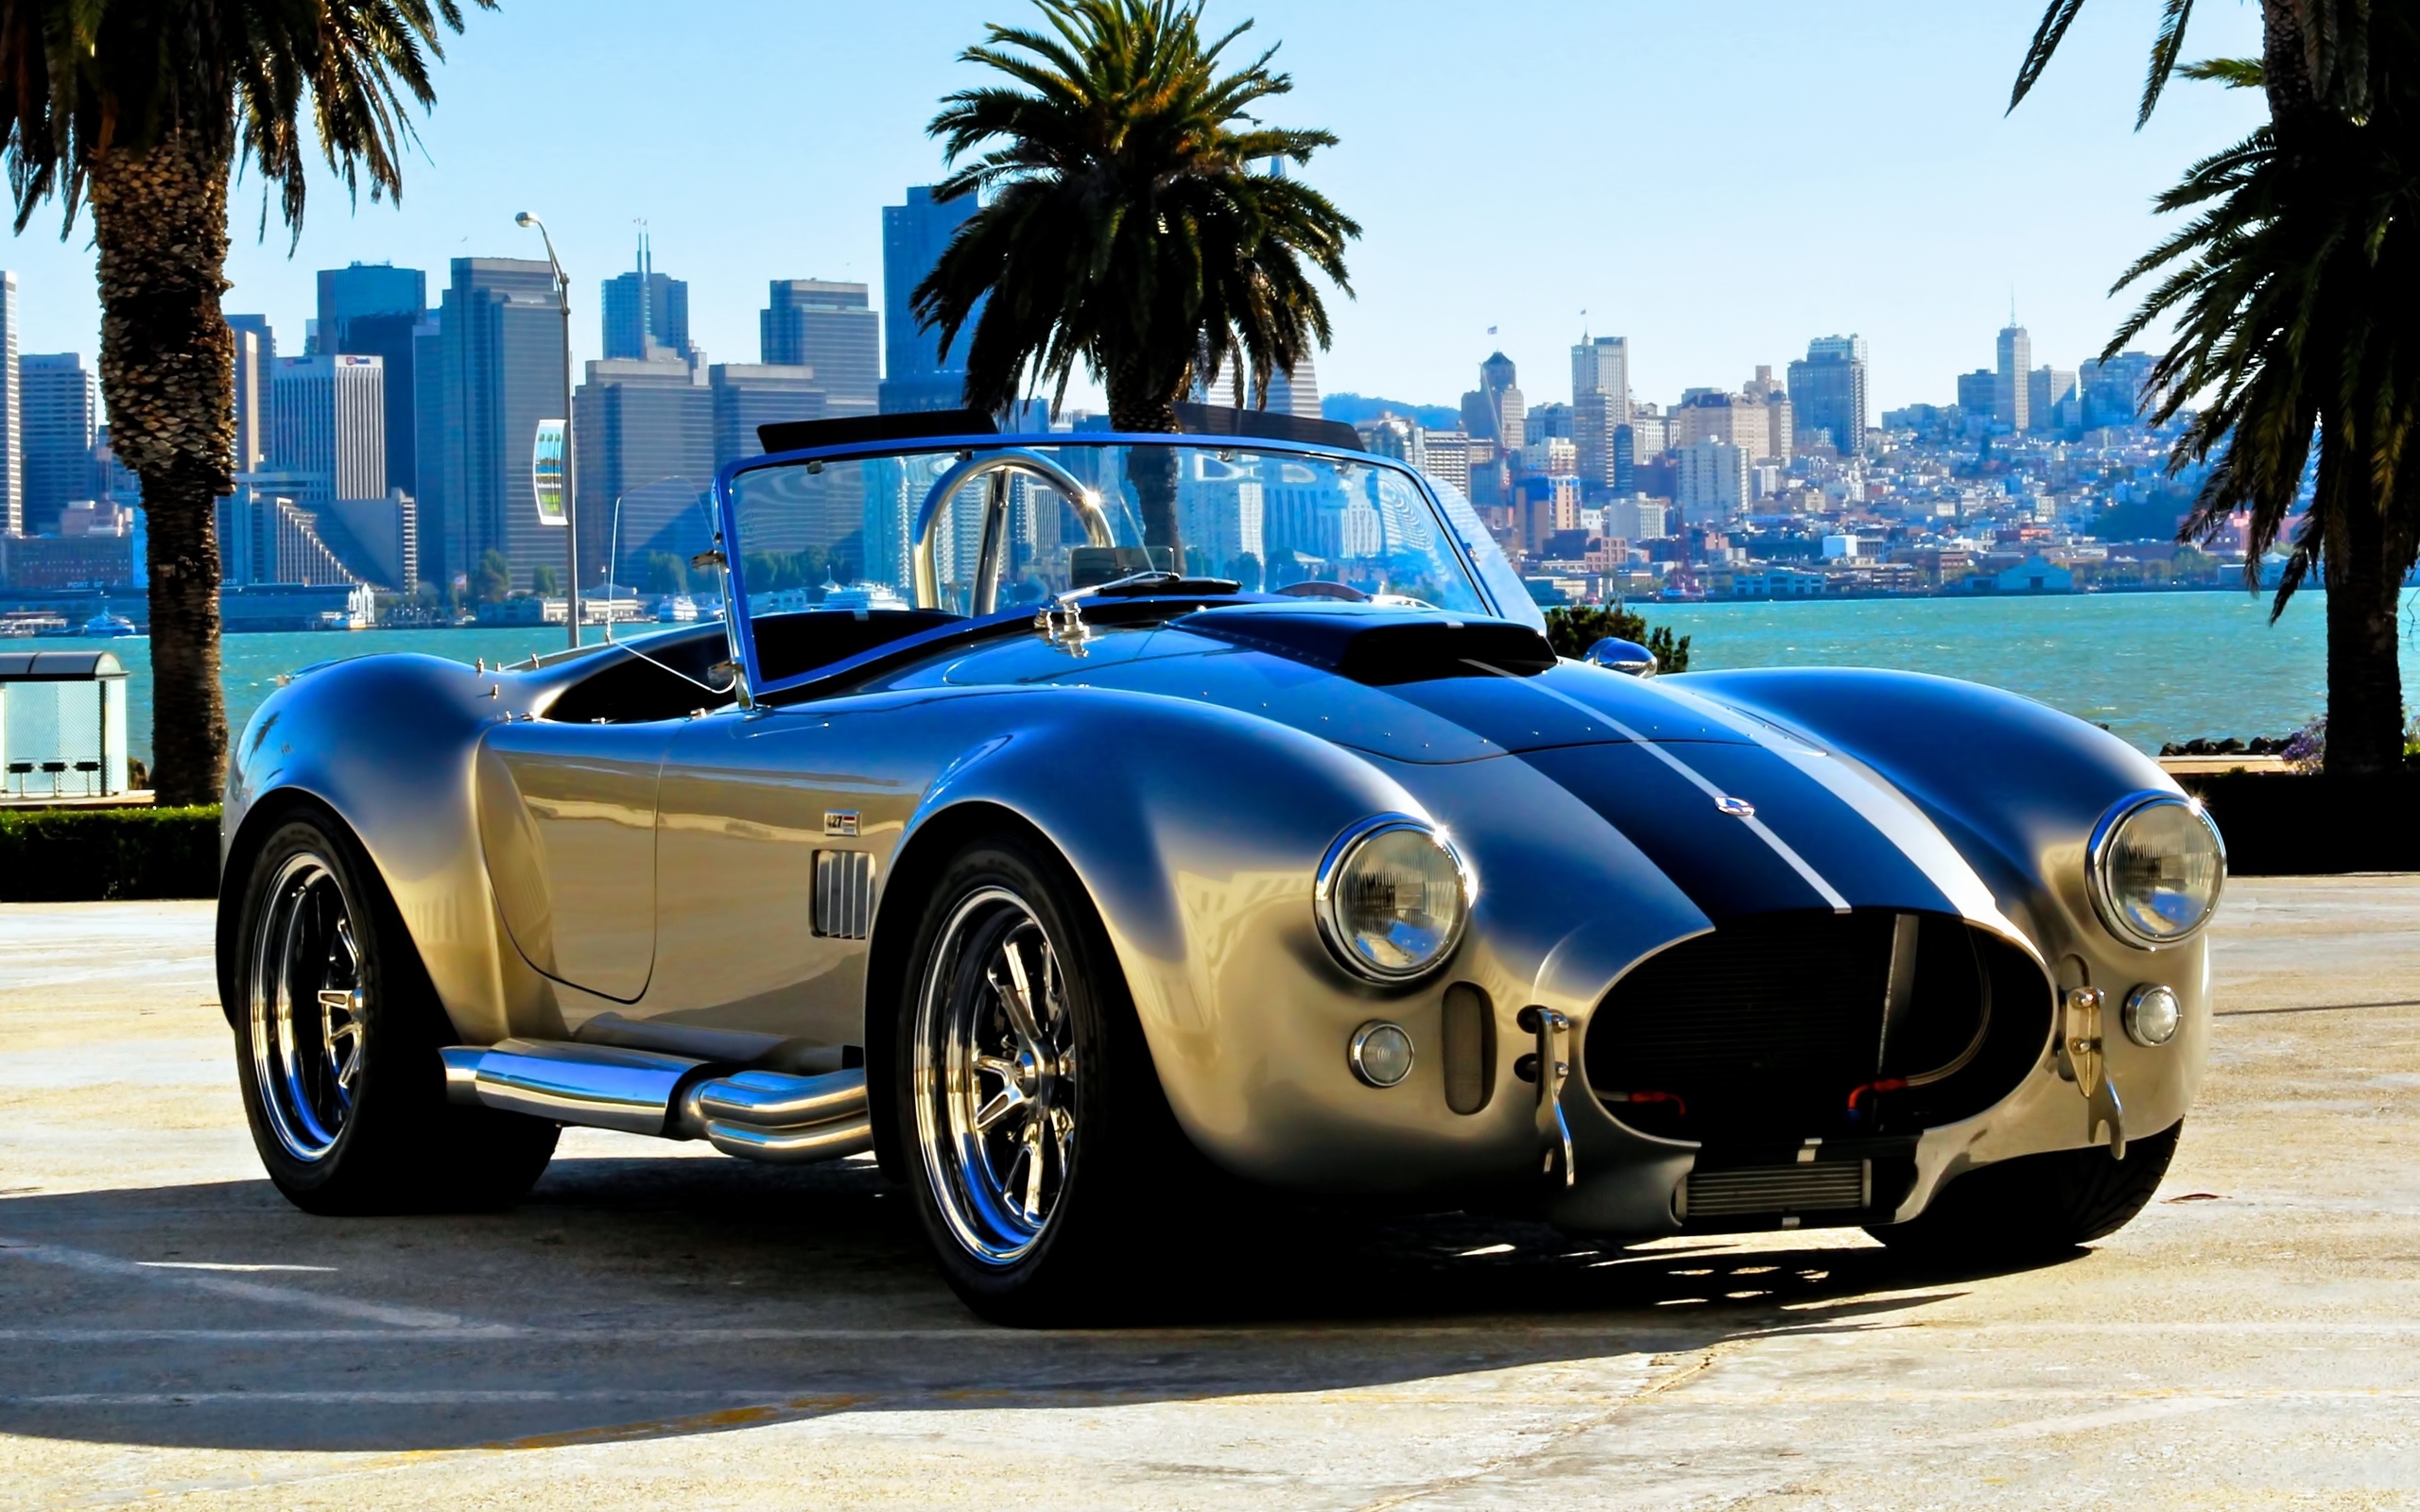 shelby, Cobra, Vehicles, Cars, Auto, Muscle, Race, Racing, Silver, Chrome, Wheels, Hot, Rod Wallpaper